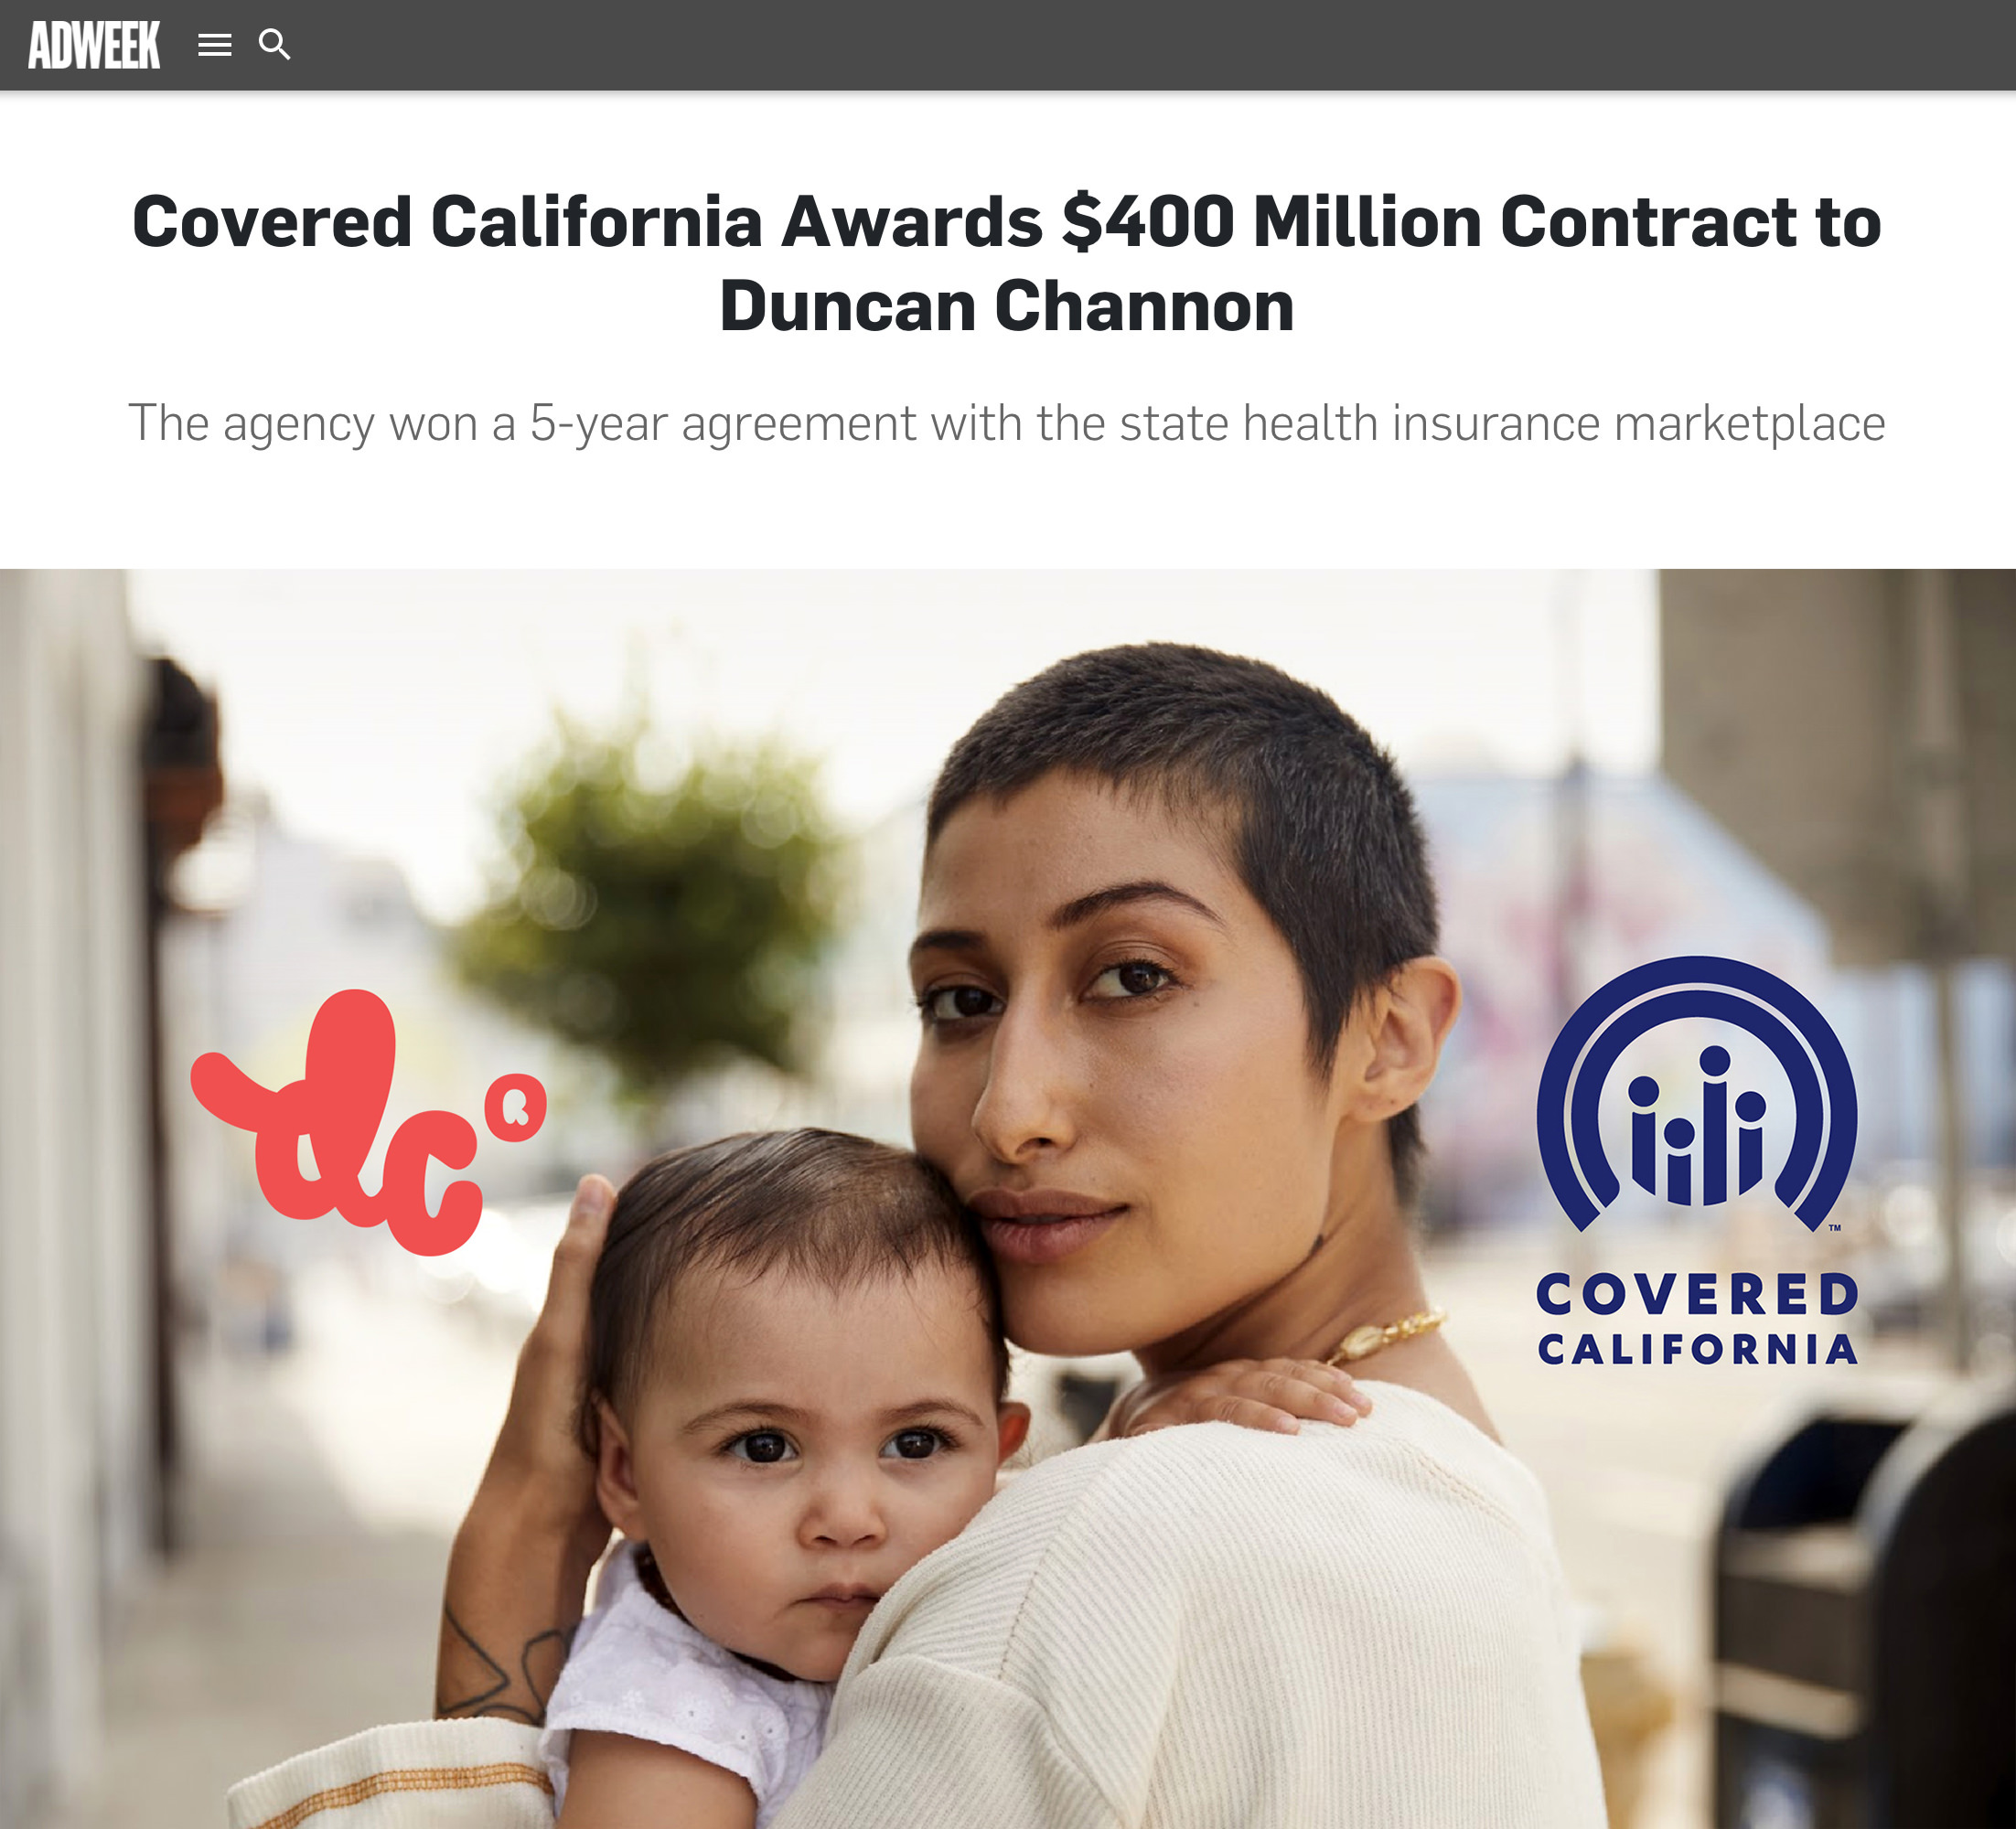 Screenshot of article as it appeared in Adweek with the headline "Covered California Awards $400 Million Contract to Duncan Channon" and subhead "The agency won a 5-year agreement with the state health insurance marketplace." The photo below shows a Female identified person with short-cropped brown hair, holding a baby to her chest. DC and Covered California Logos overlay the image on left and right, respectively.